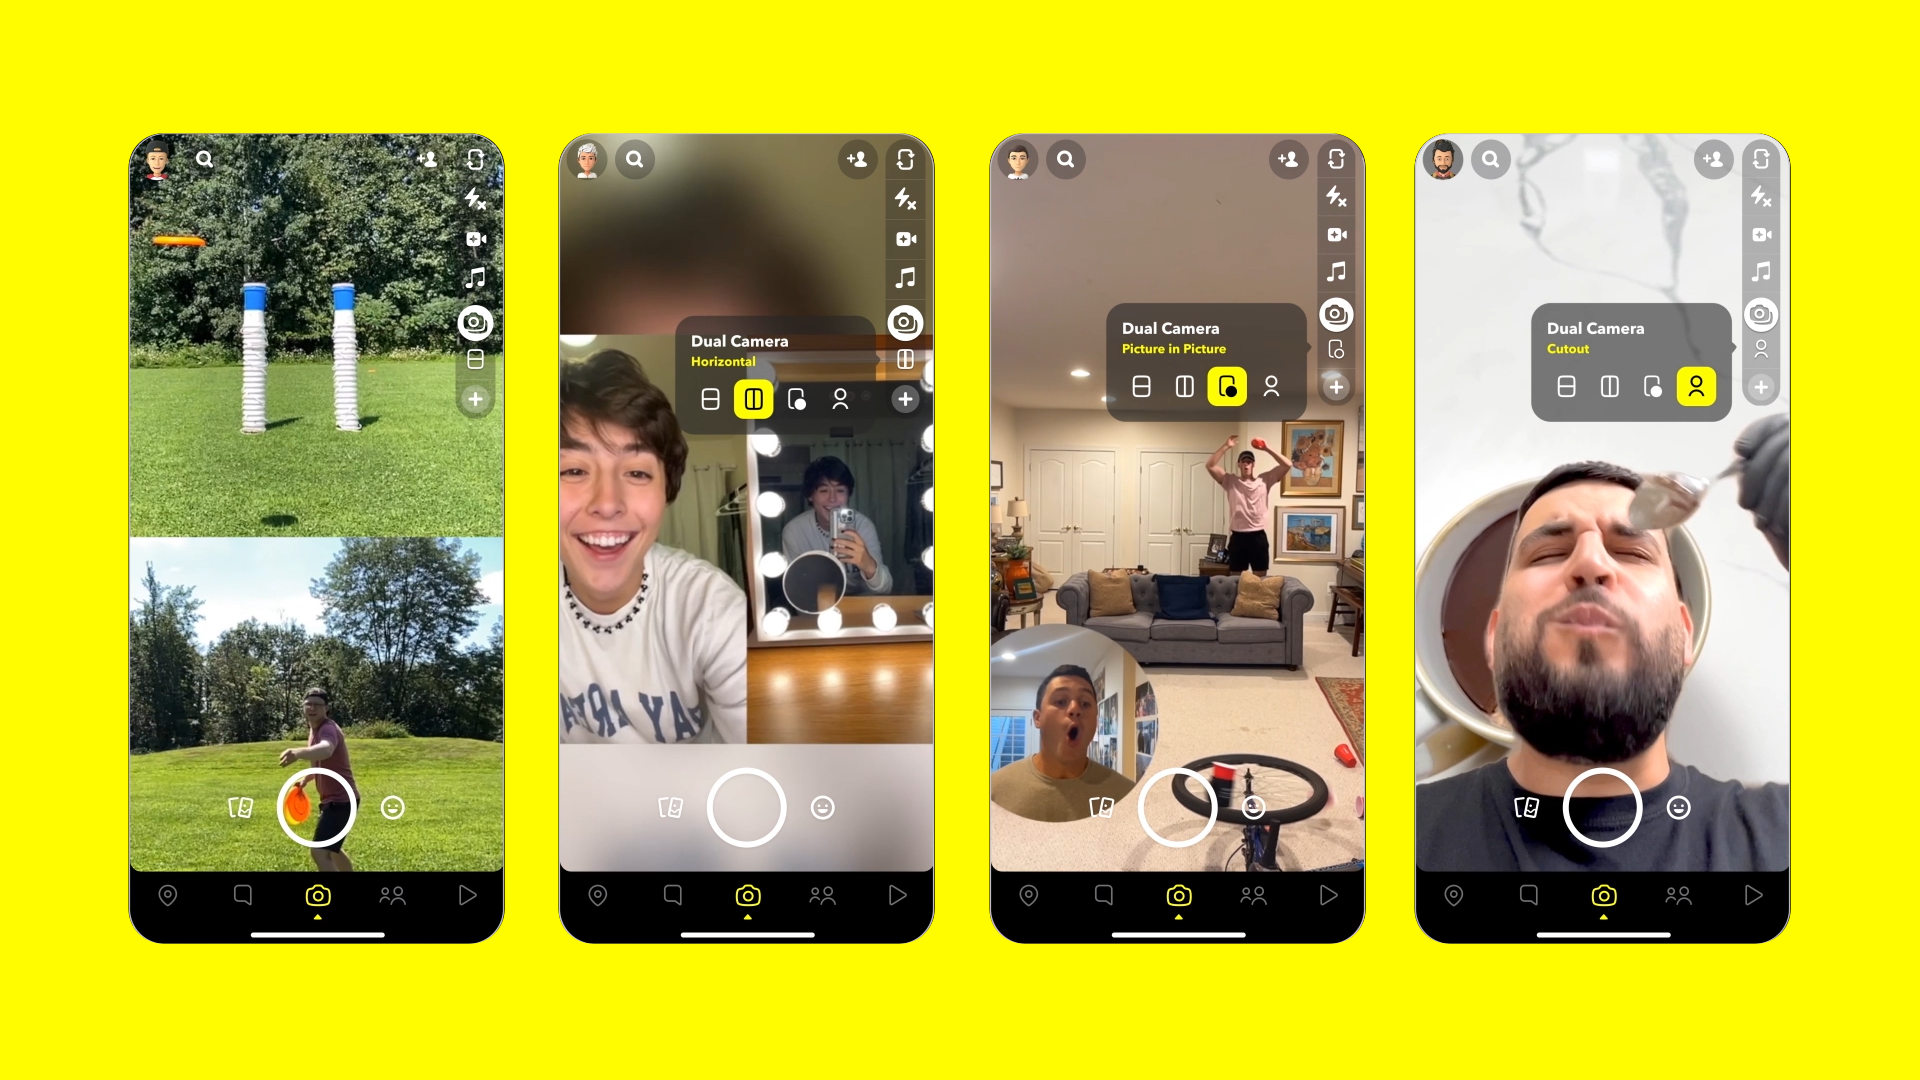 Be a Part of Every Moment With Snapchat’s Dual Camera!